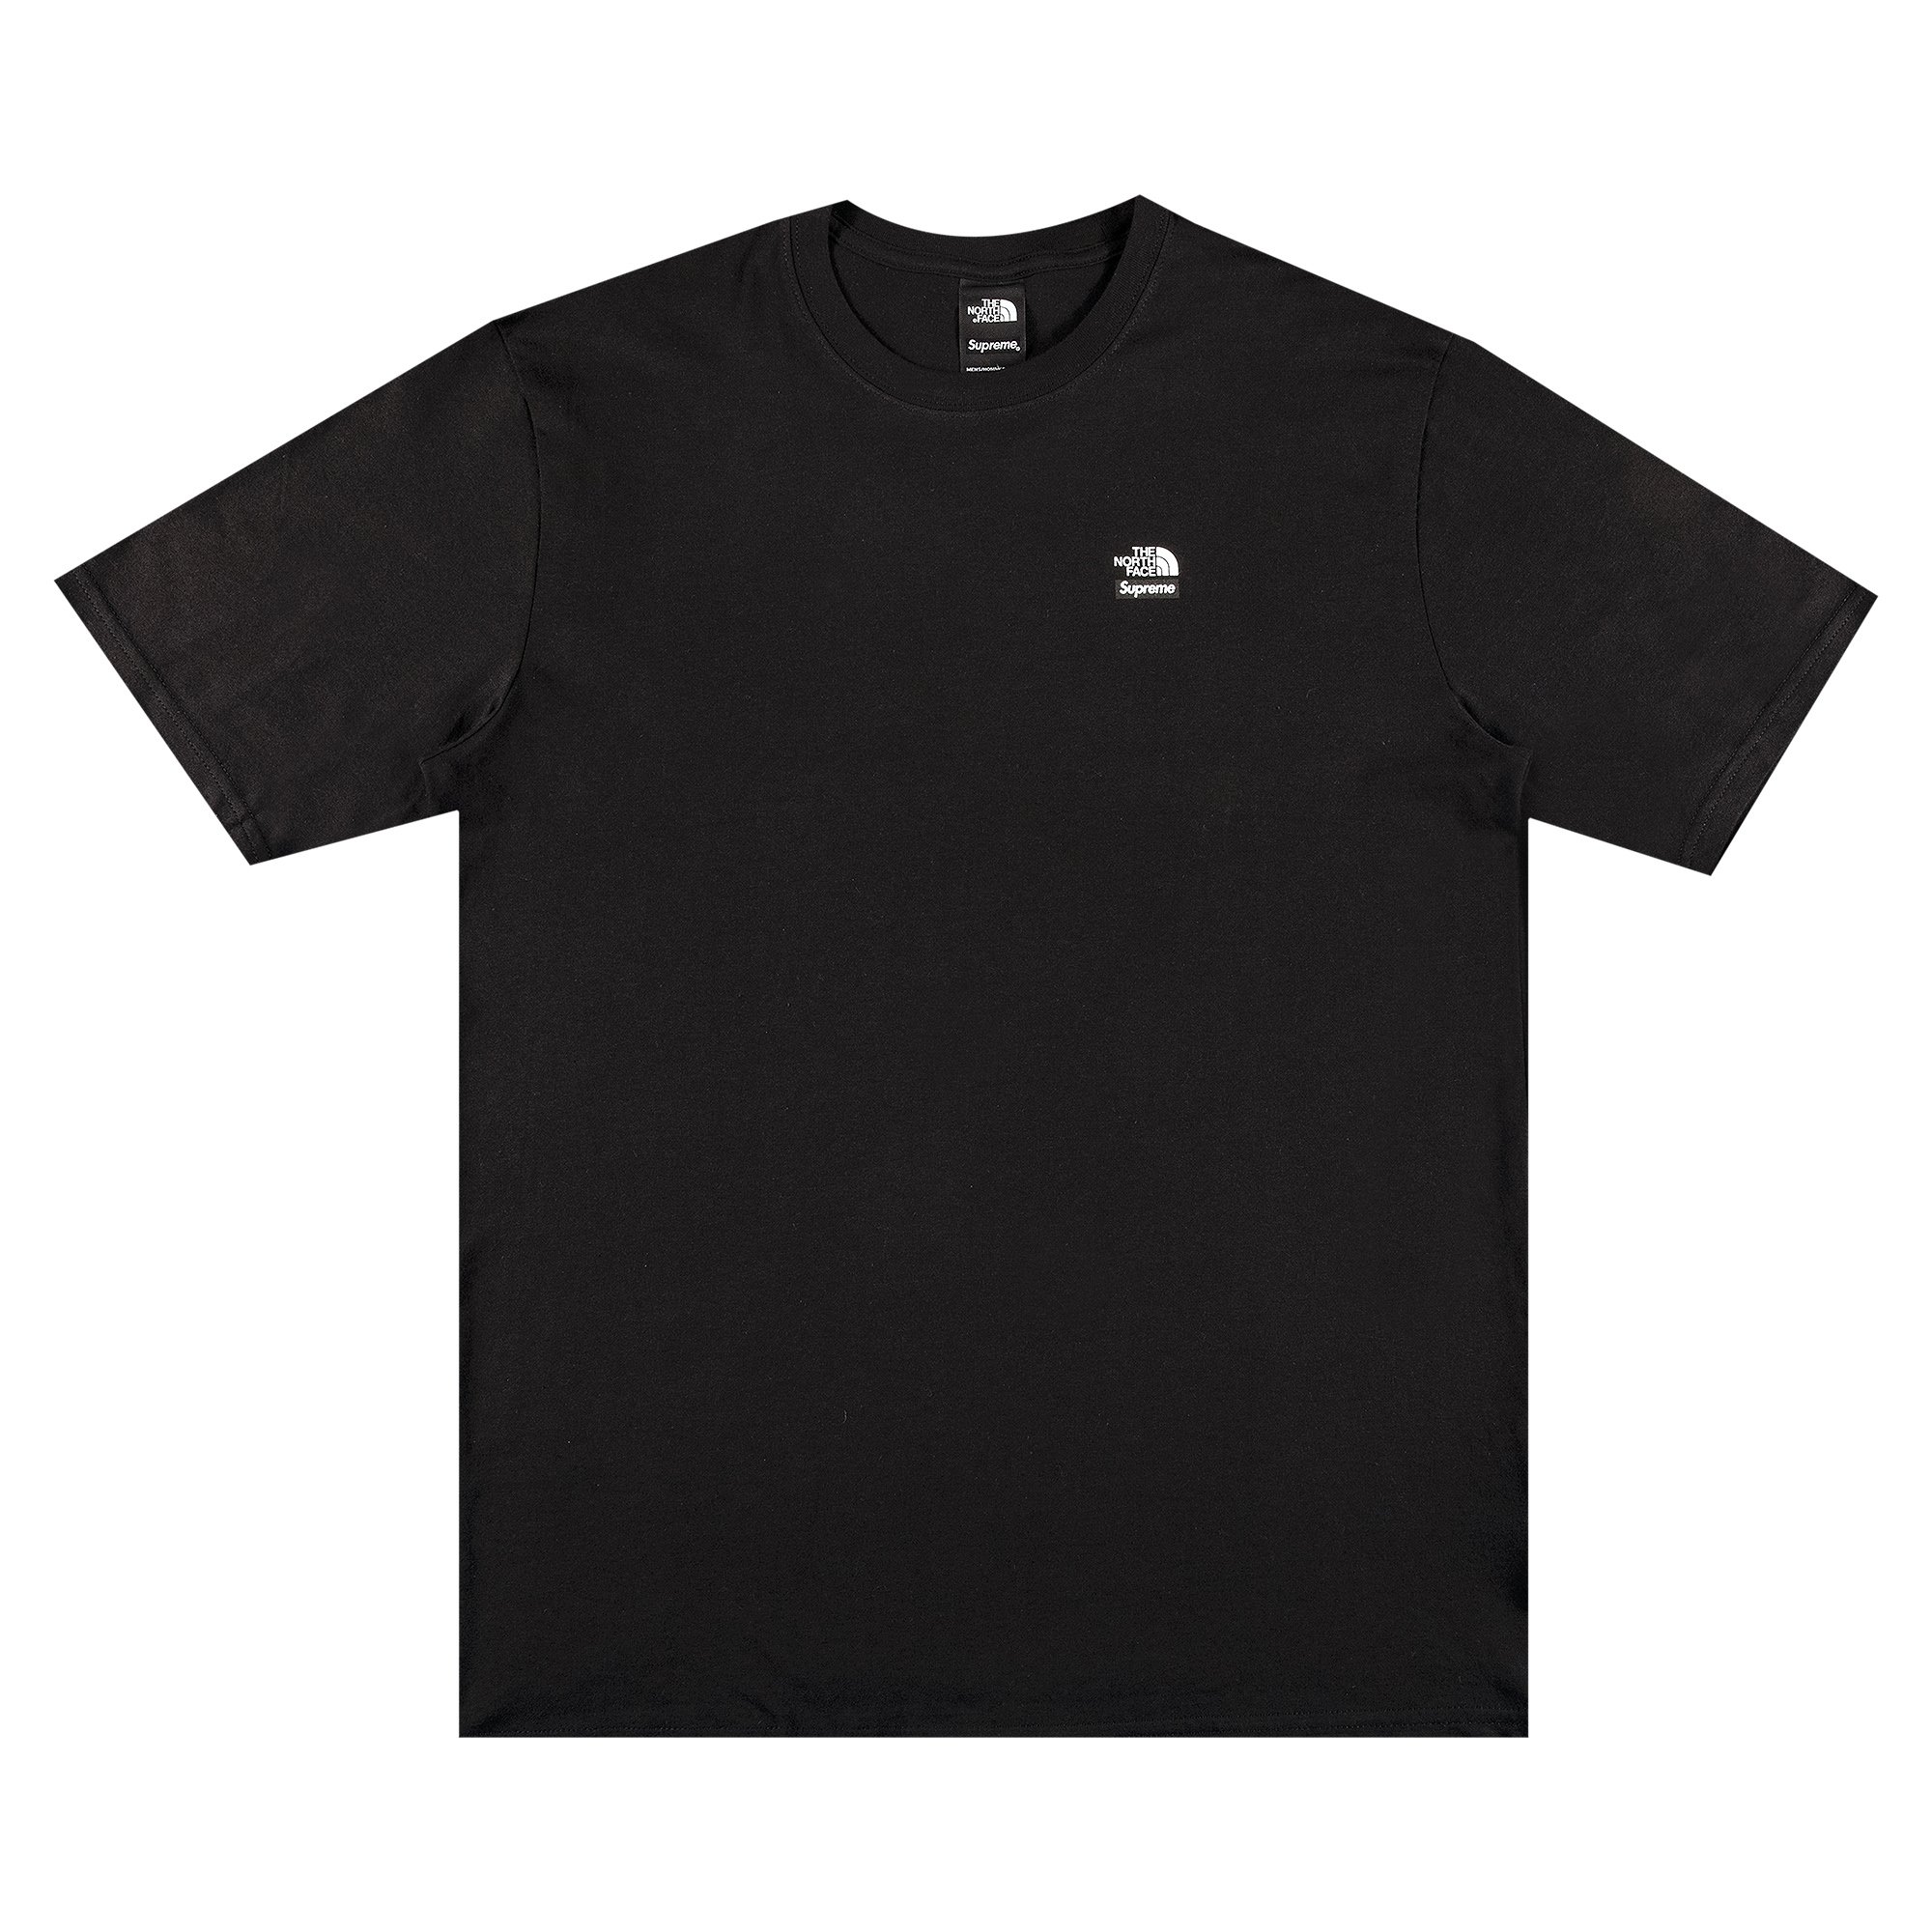 Buy Supreme x The North Face Mountains Tee 'Black' - FW21KN1 BLACK